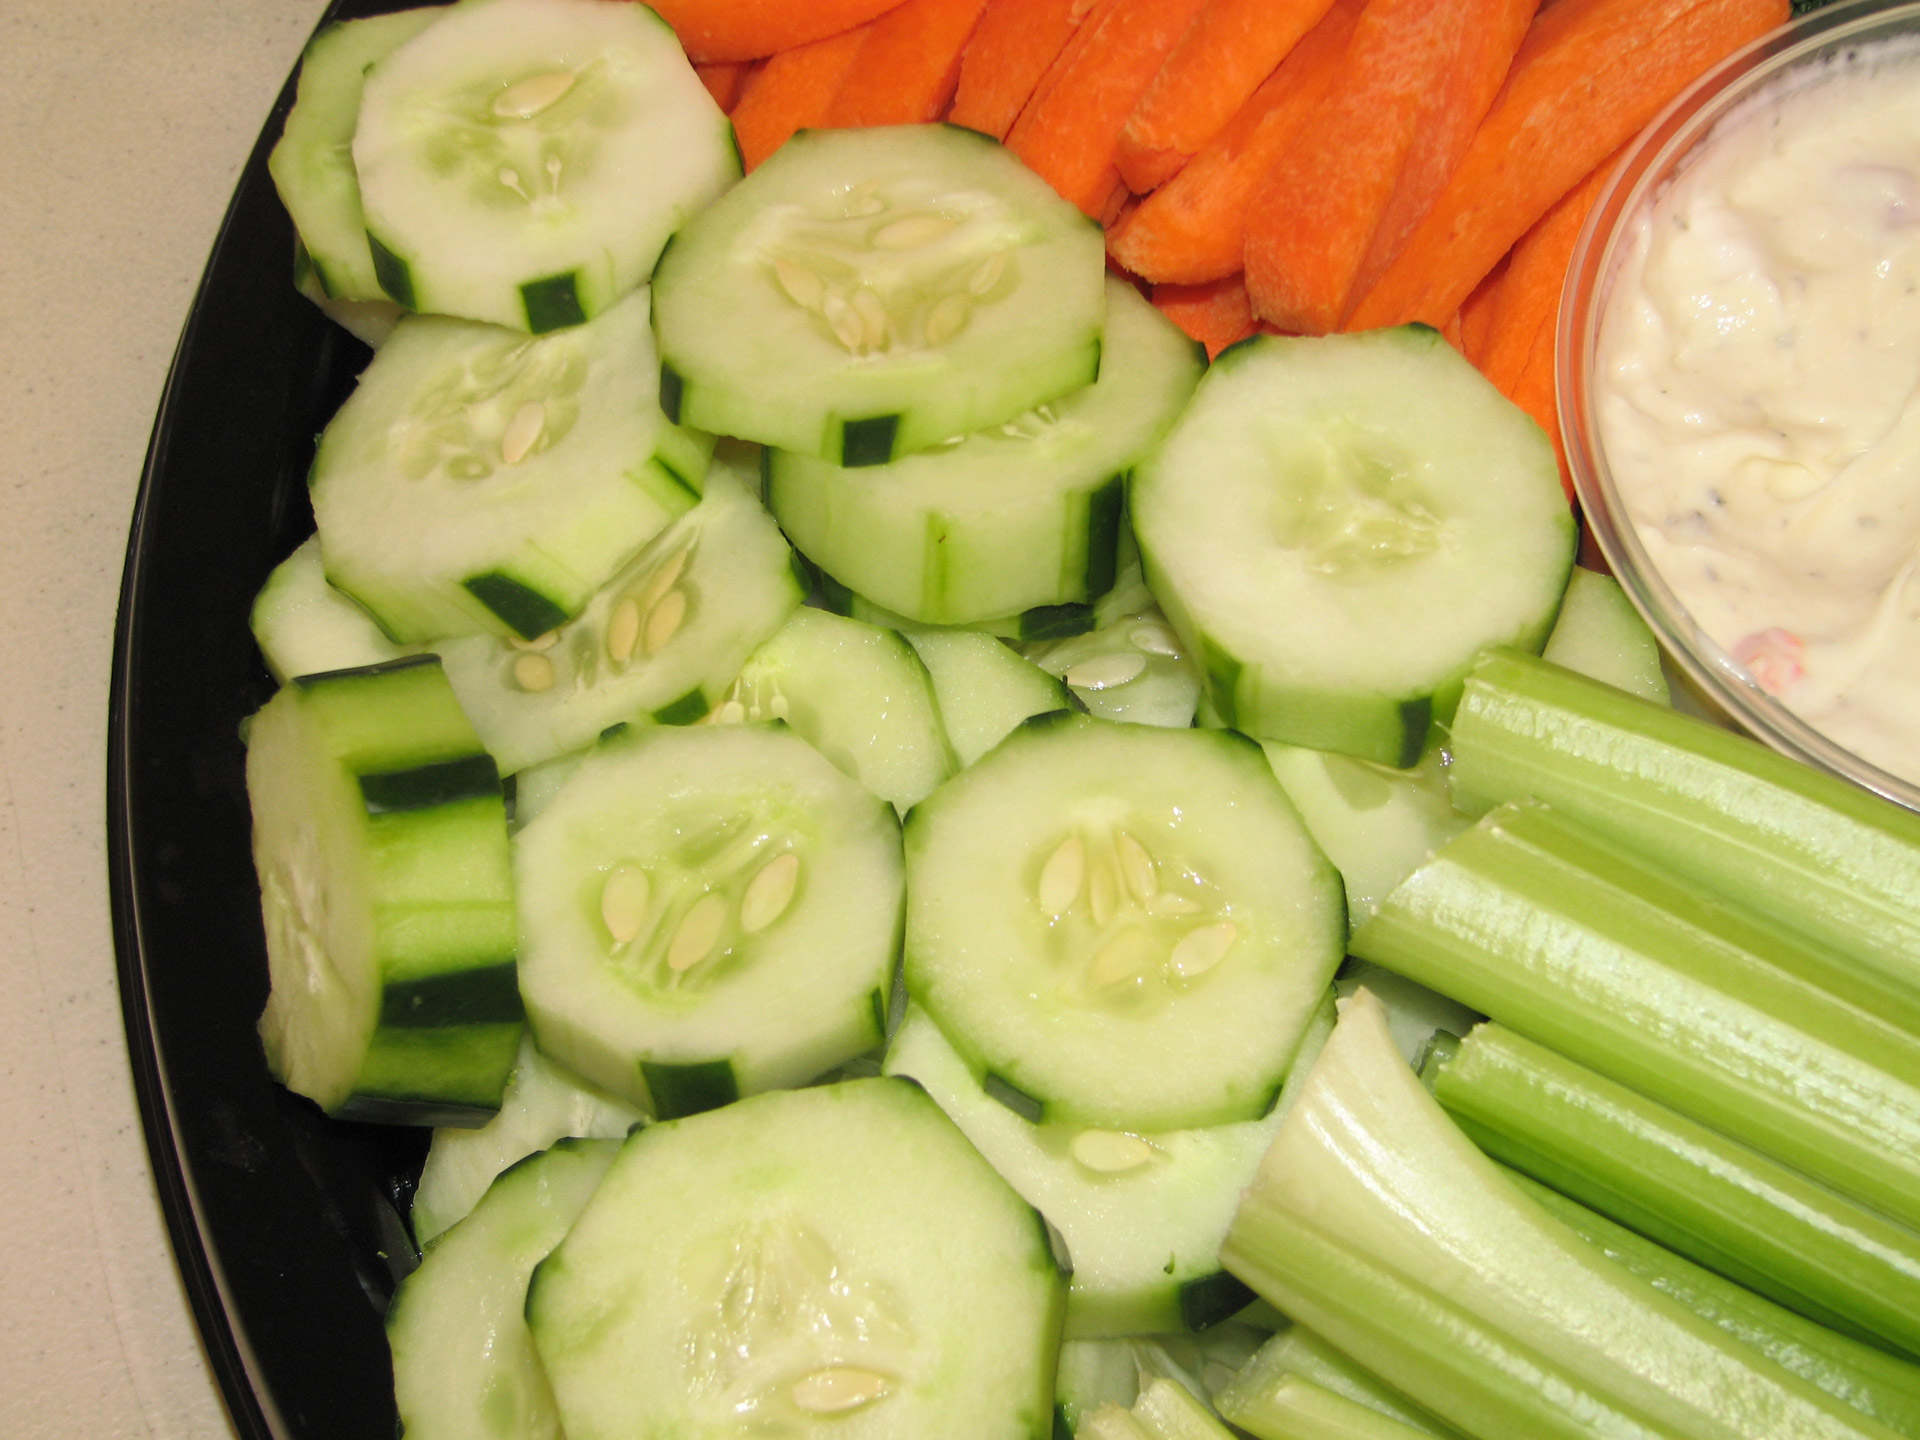 An image of a healthy snack with cucumbers, carrots, celery, and dip.